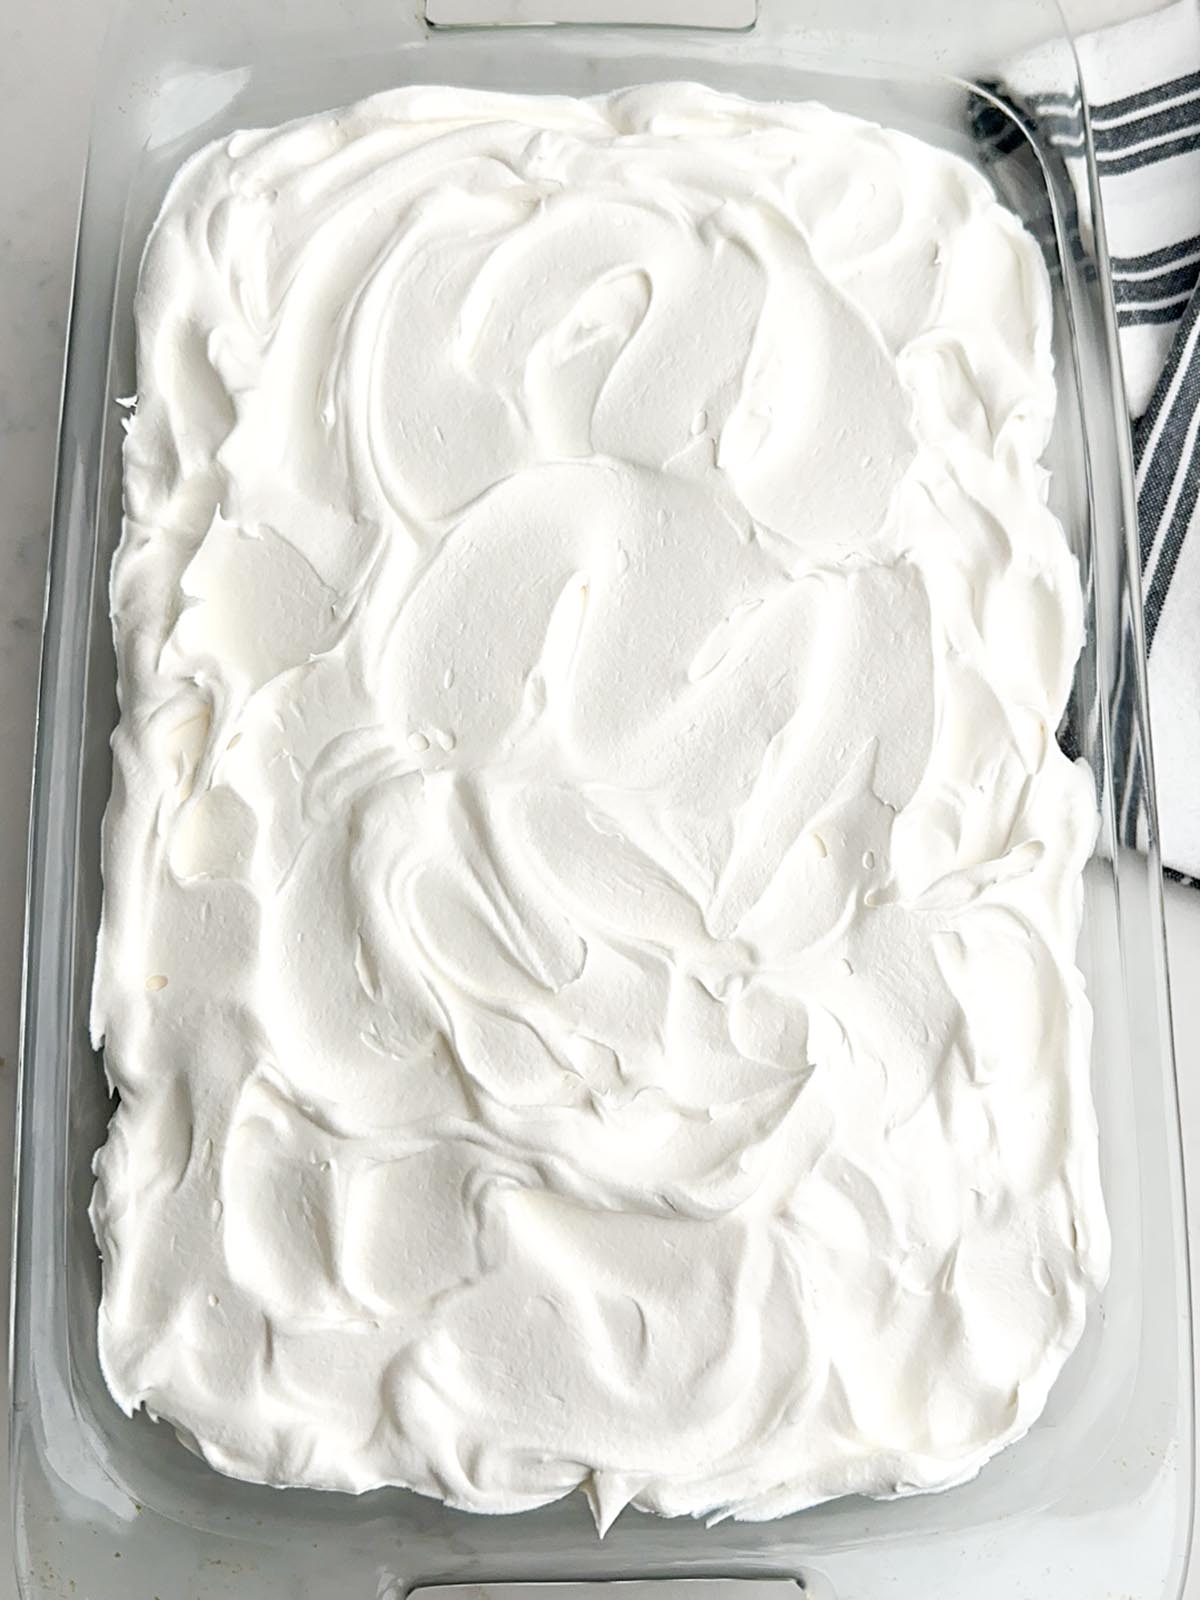 Cool Whip layer spread over pudding layer